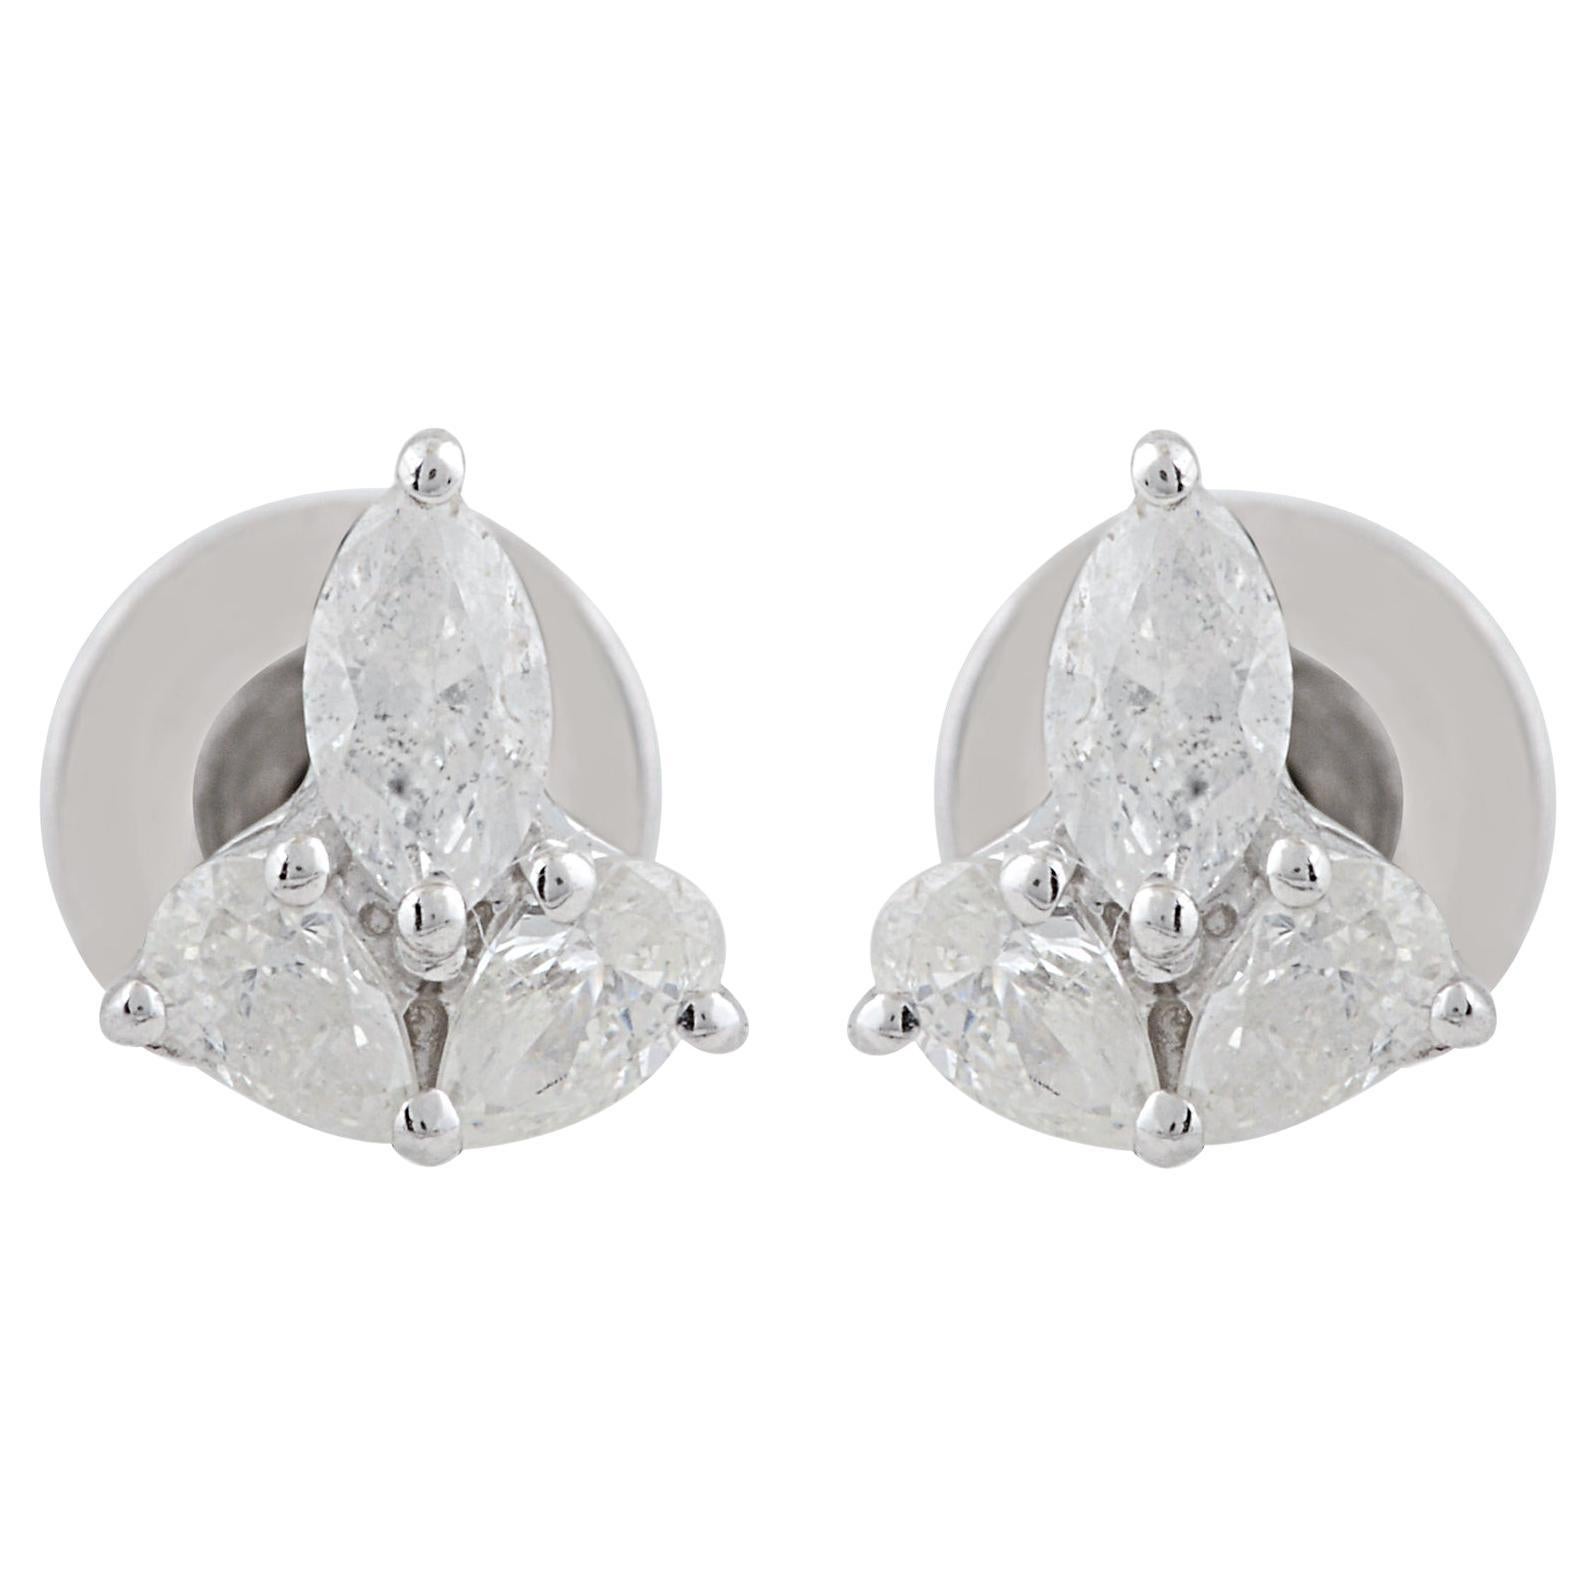 Real SI Clarity HI Color Pear Marquise Diamond Stud Earrings 10 Karat White Gold